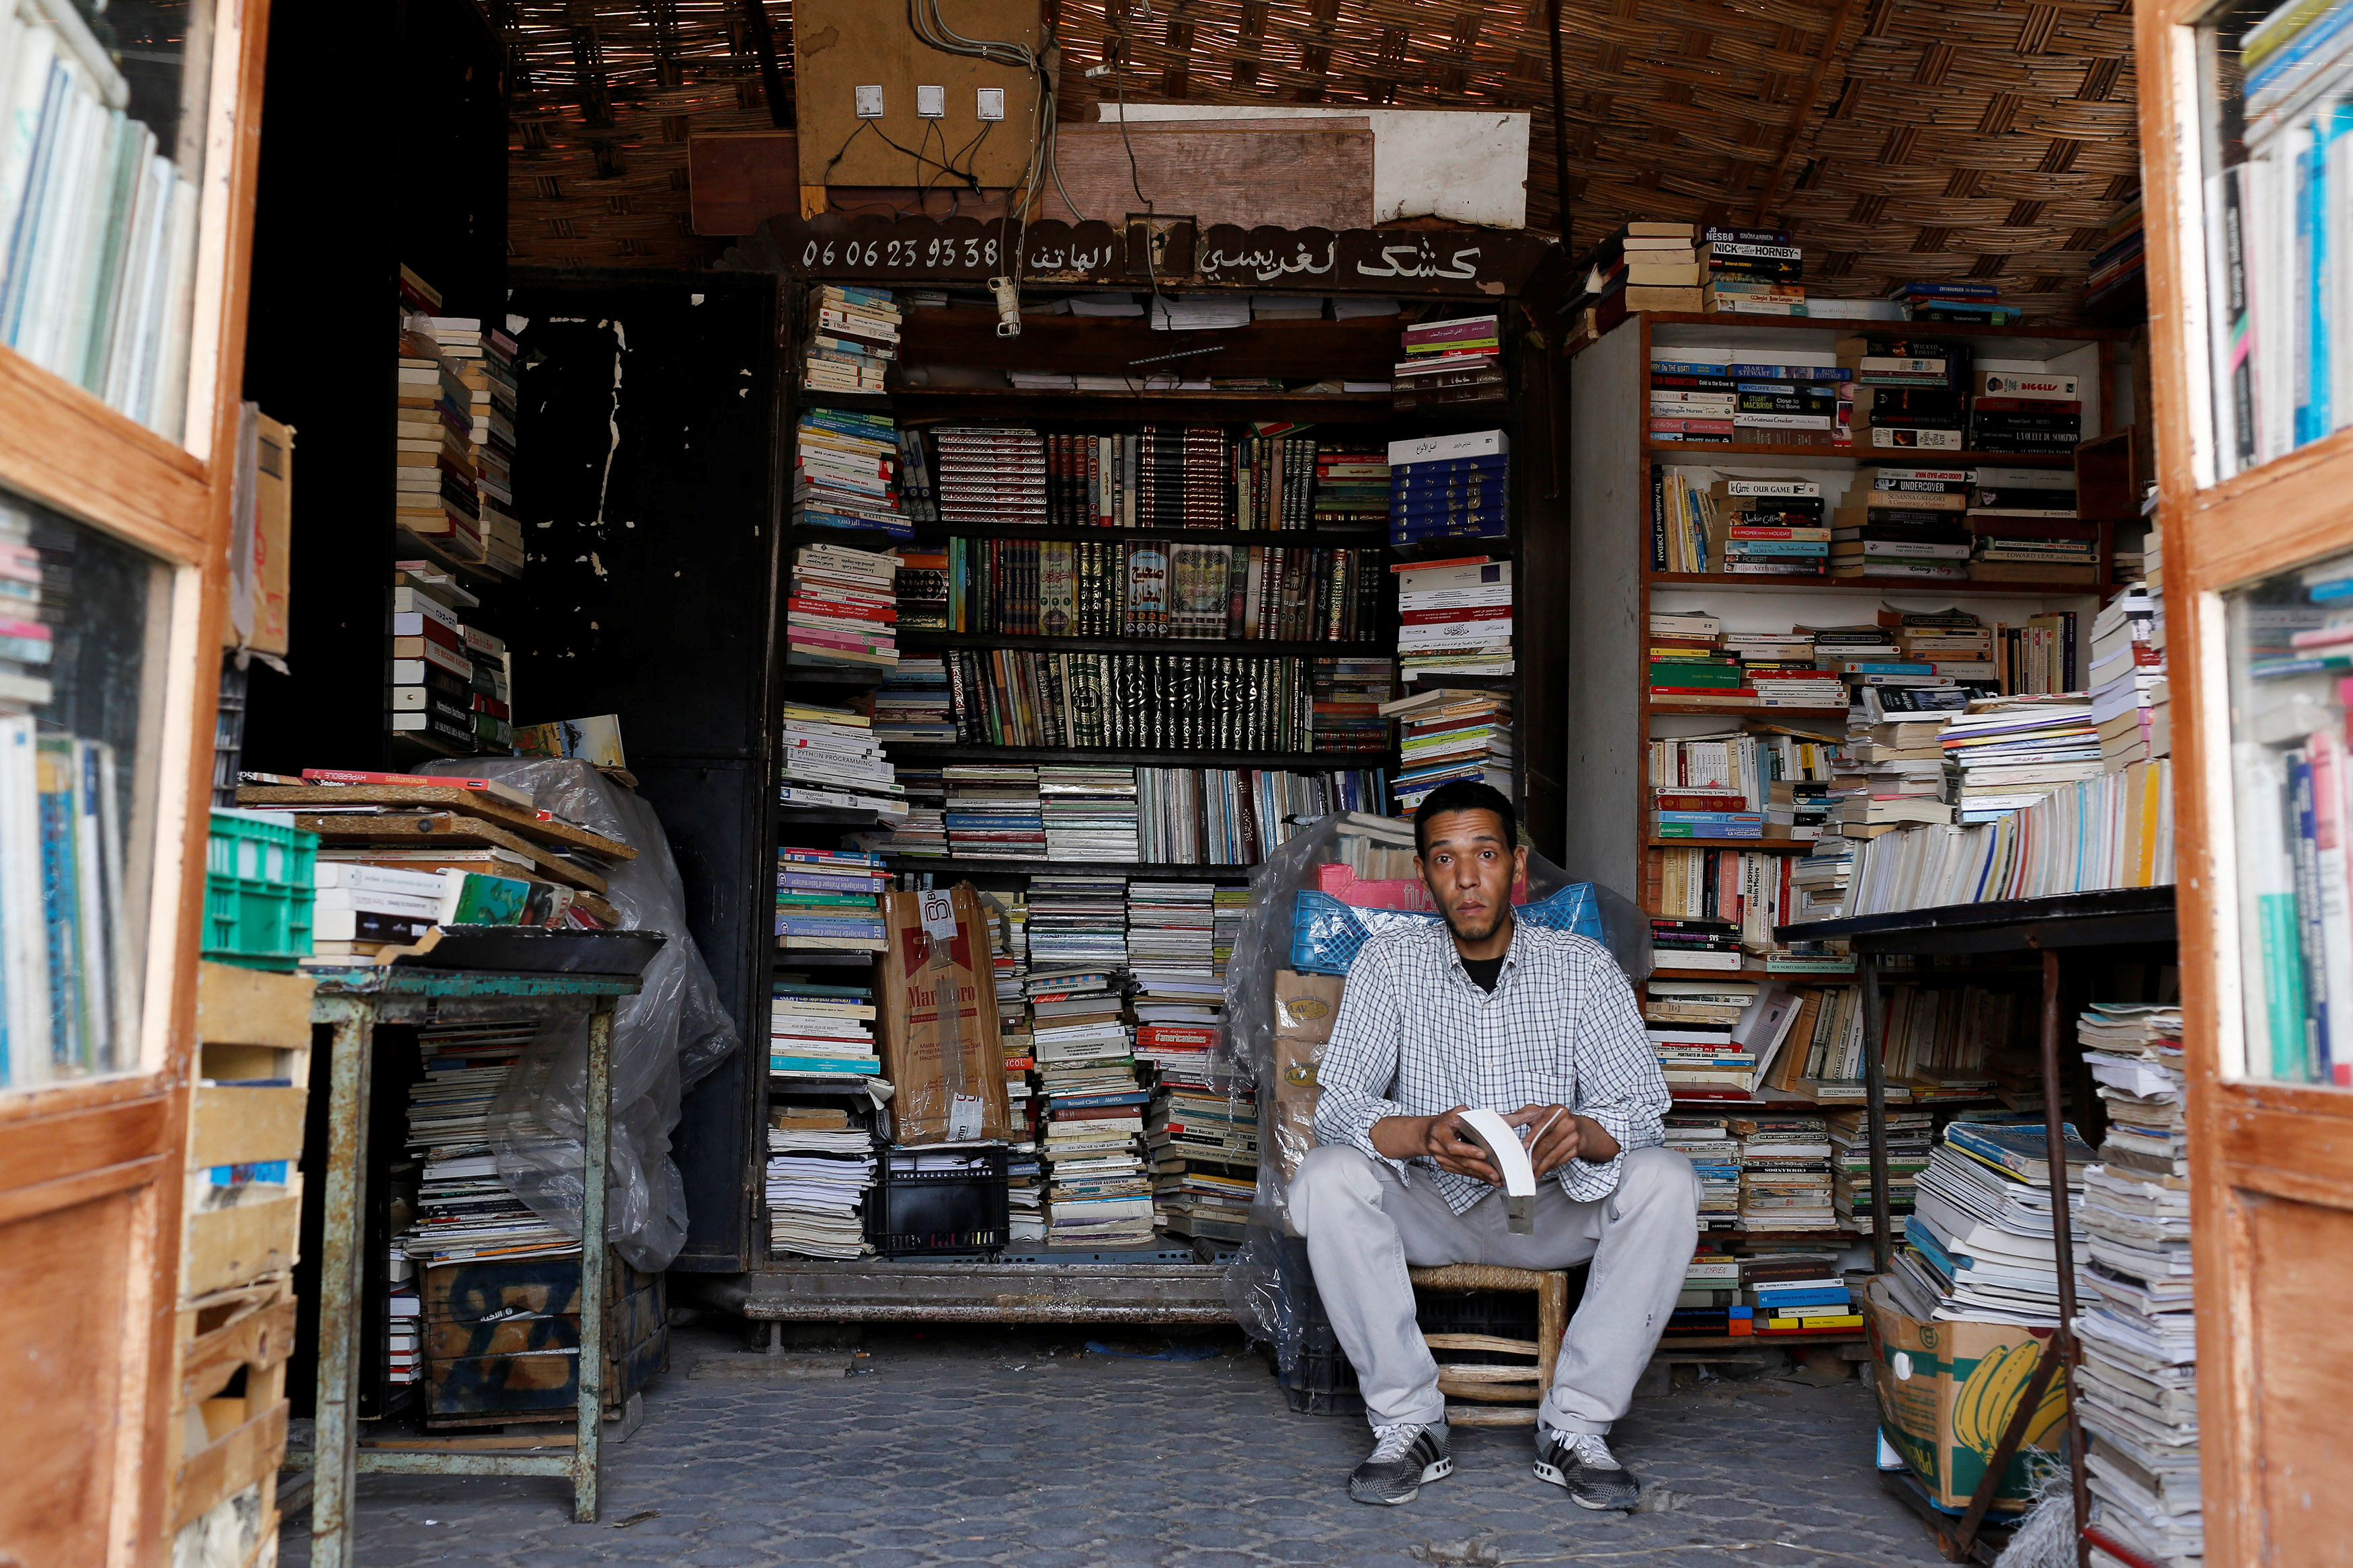 Marrakech's historic booksellers once again face eviction